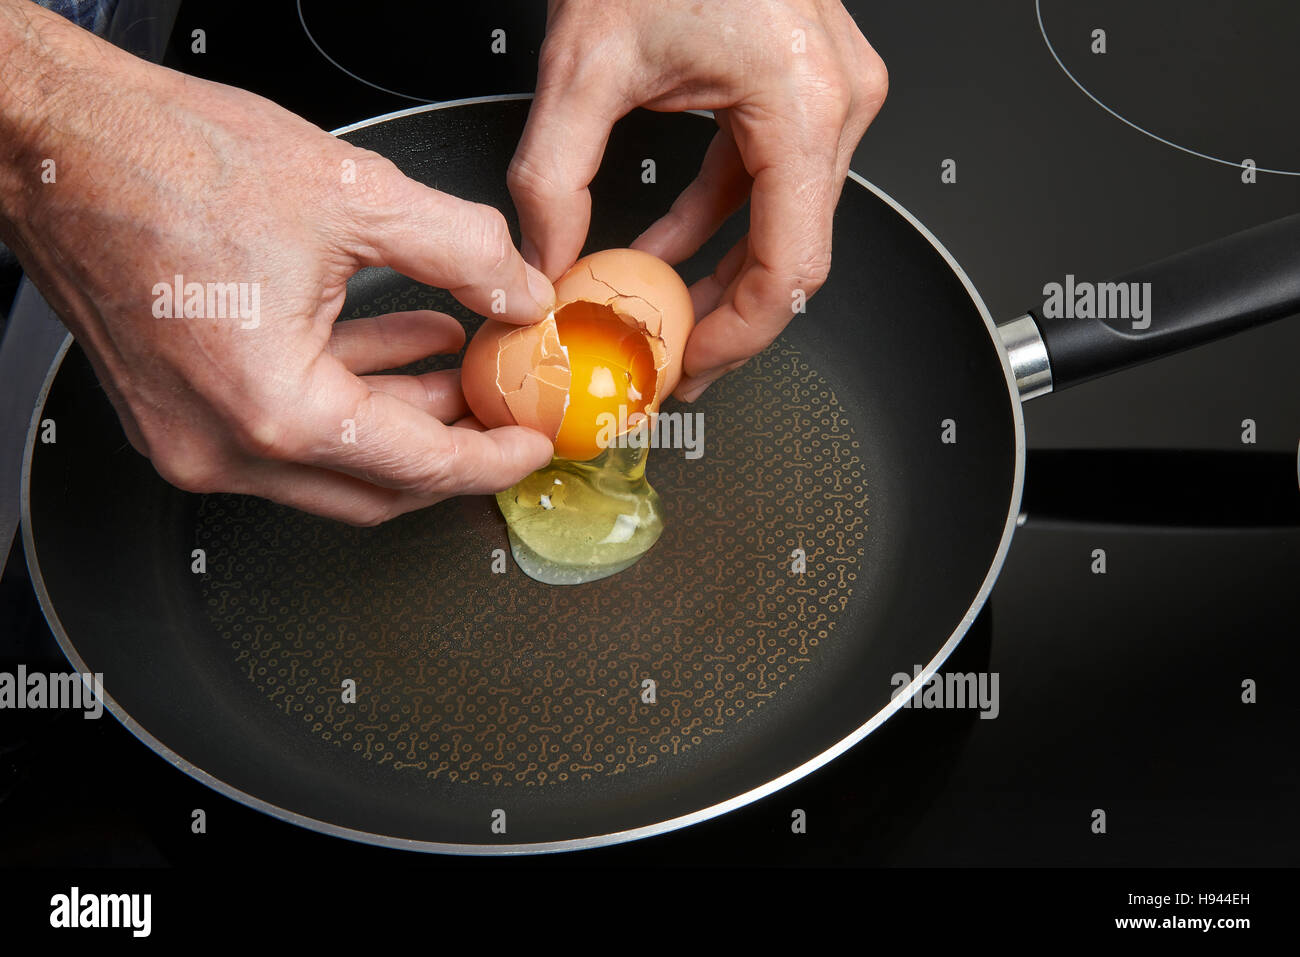 Man's hand above frying pan with cooked eggs Stock Photo